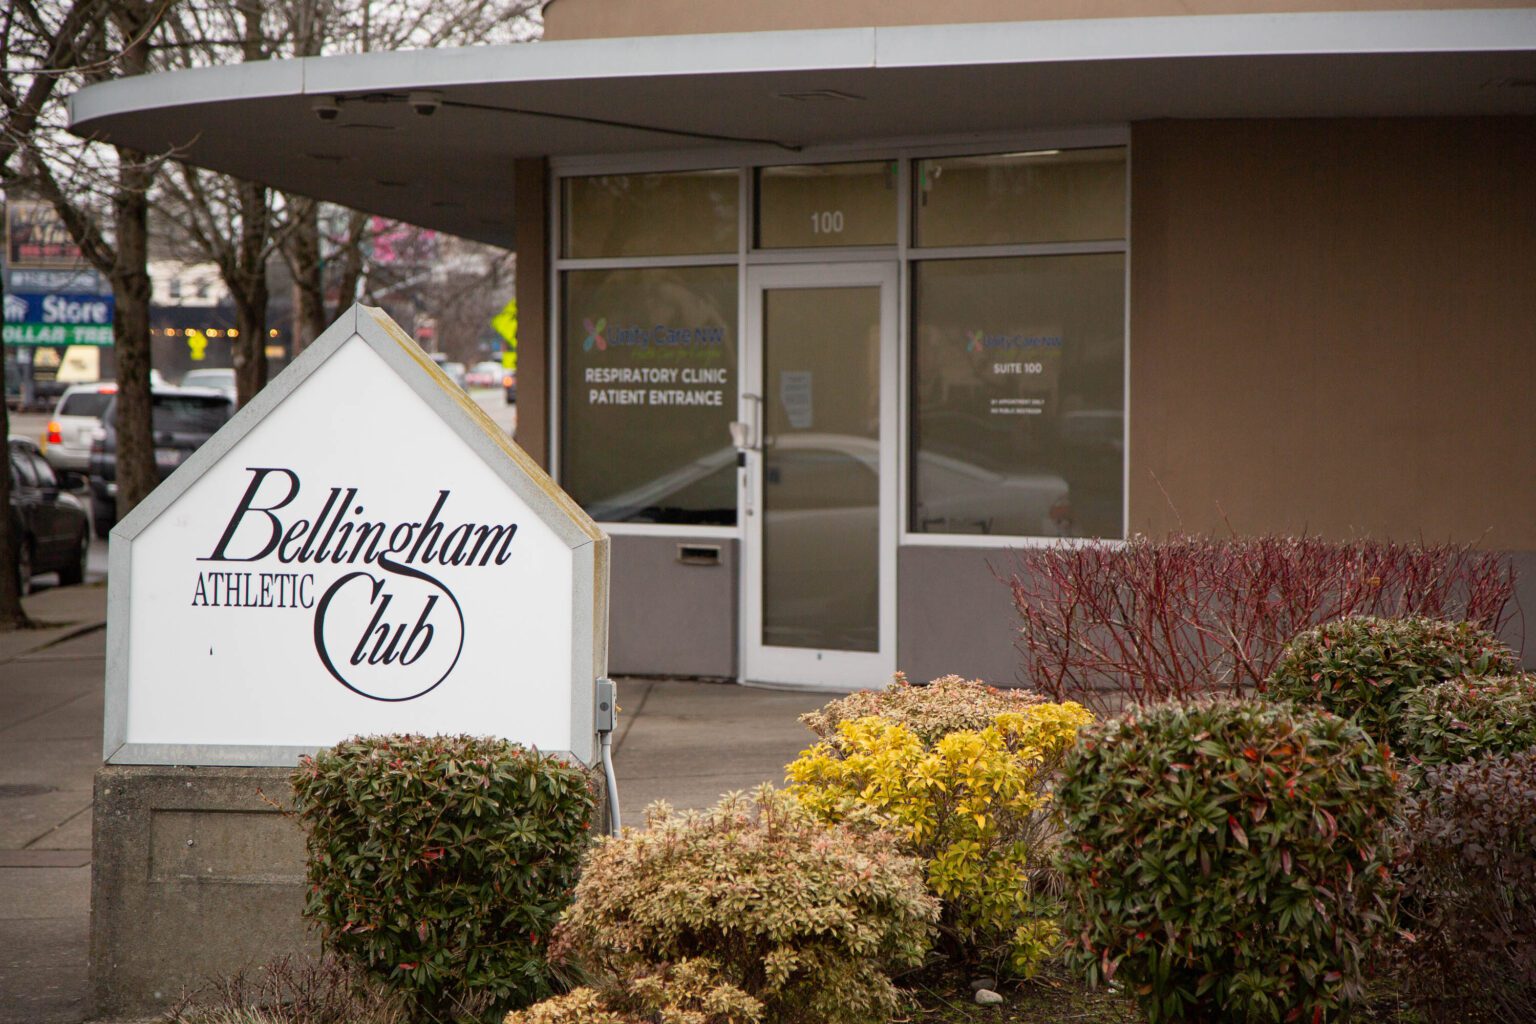 The owner of Bellingham Athletic Club said the downtown location will close in March